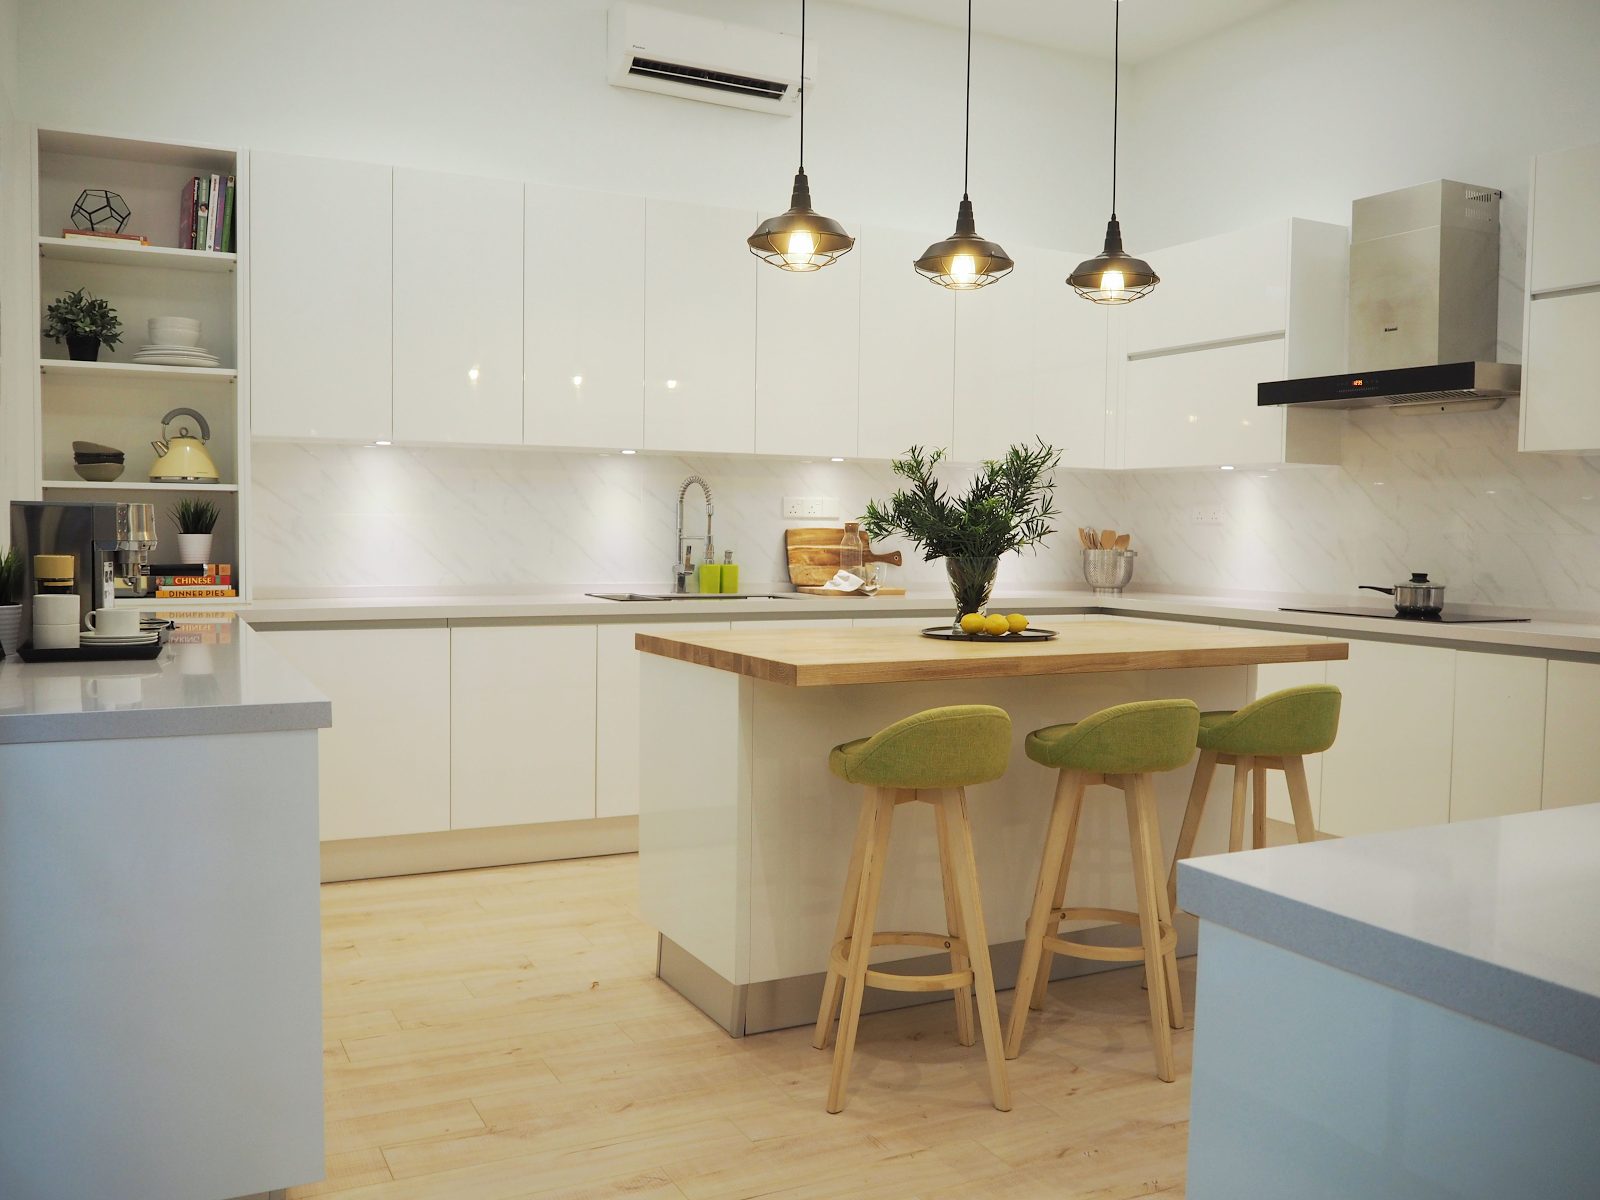 A brightly-lit kitchen will help you function more fluidly, and it also sets the mood of the kitchen.